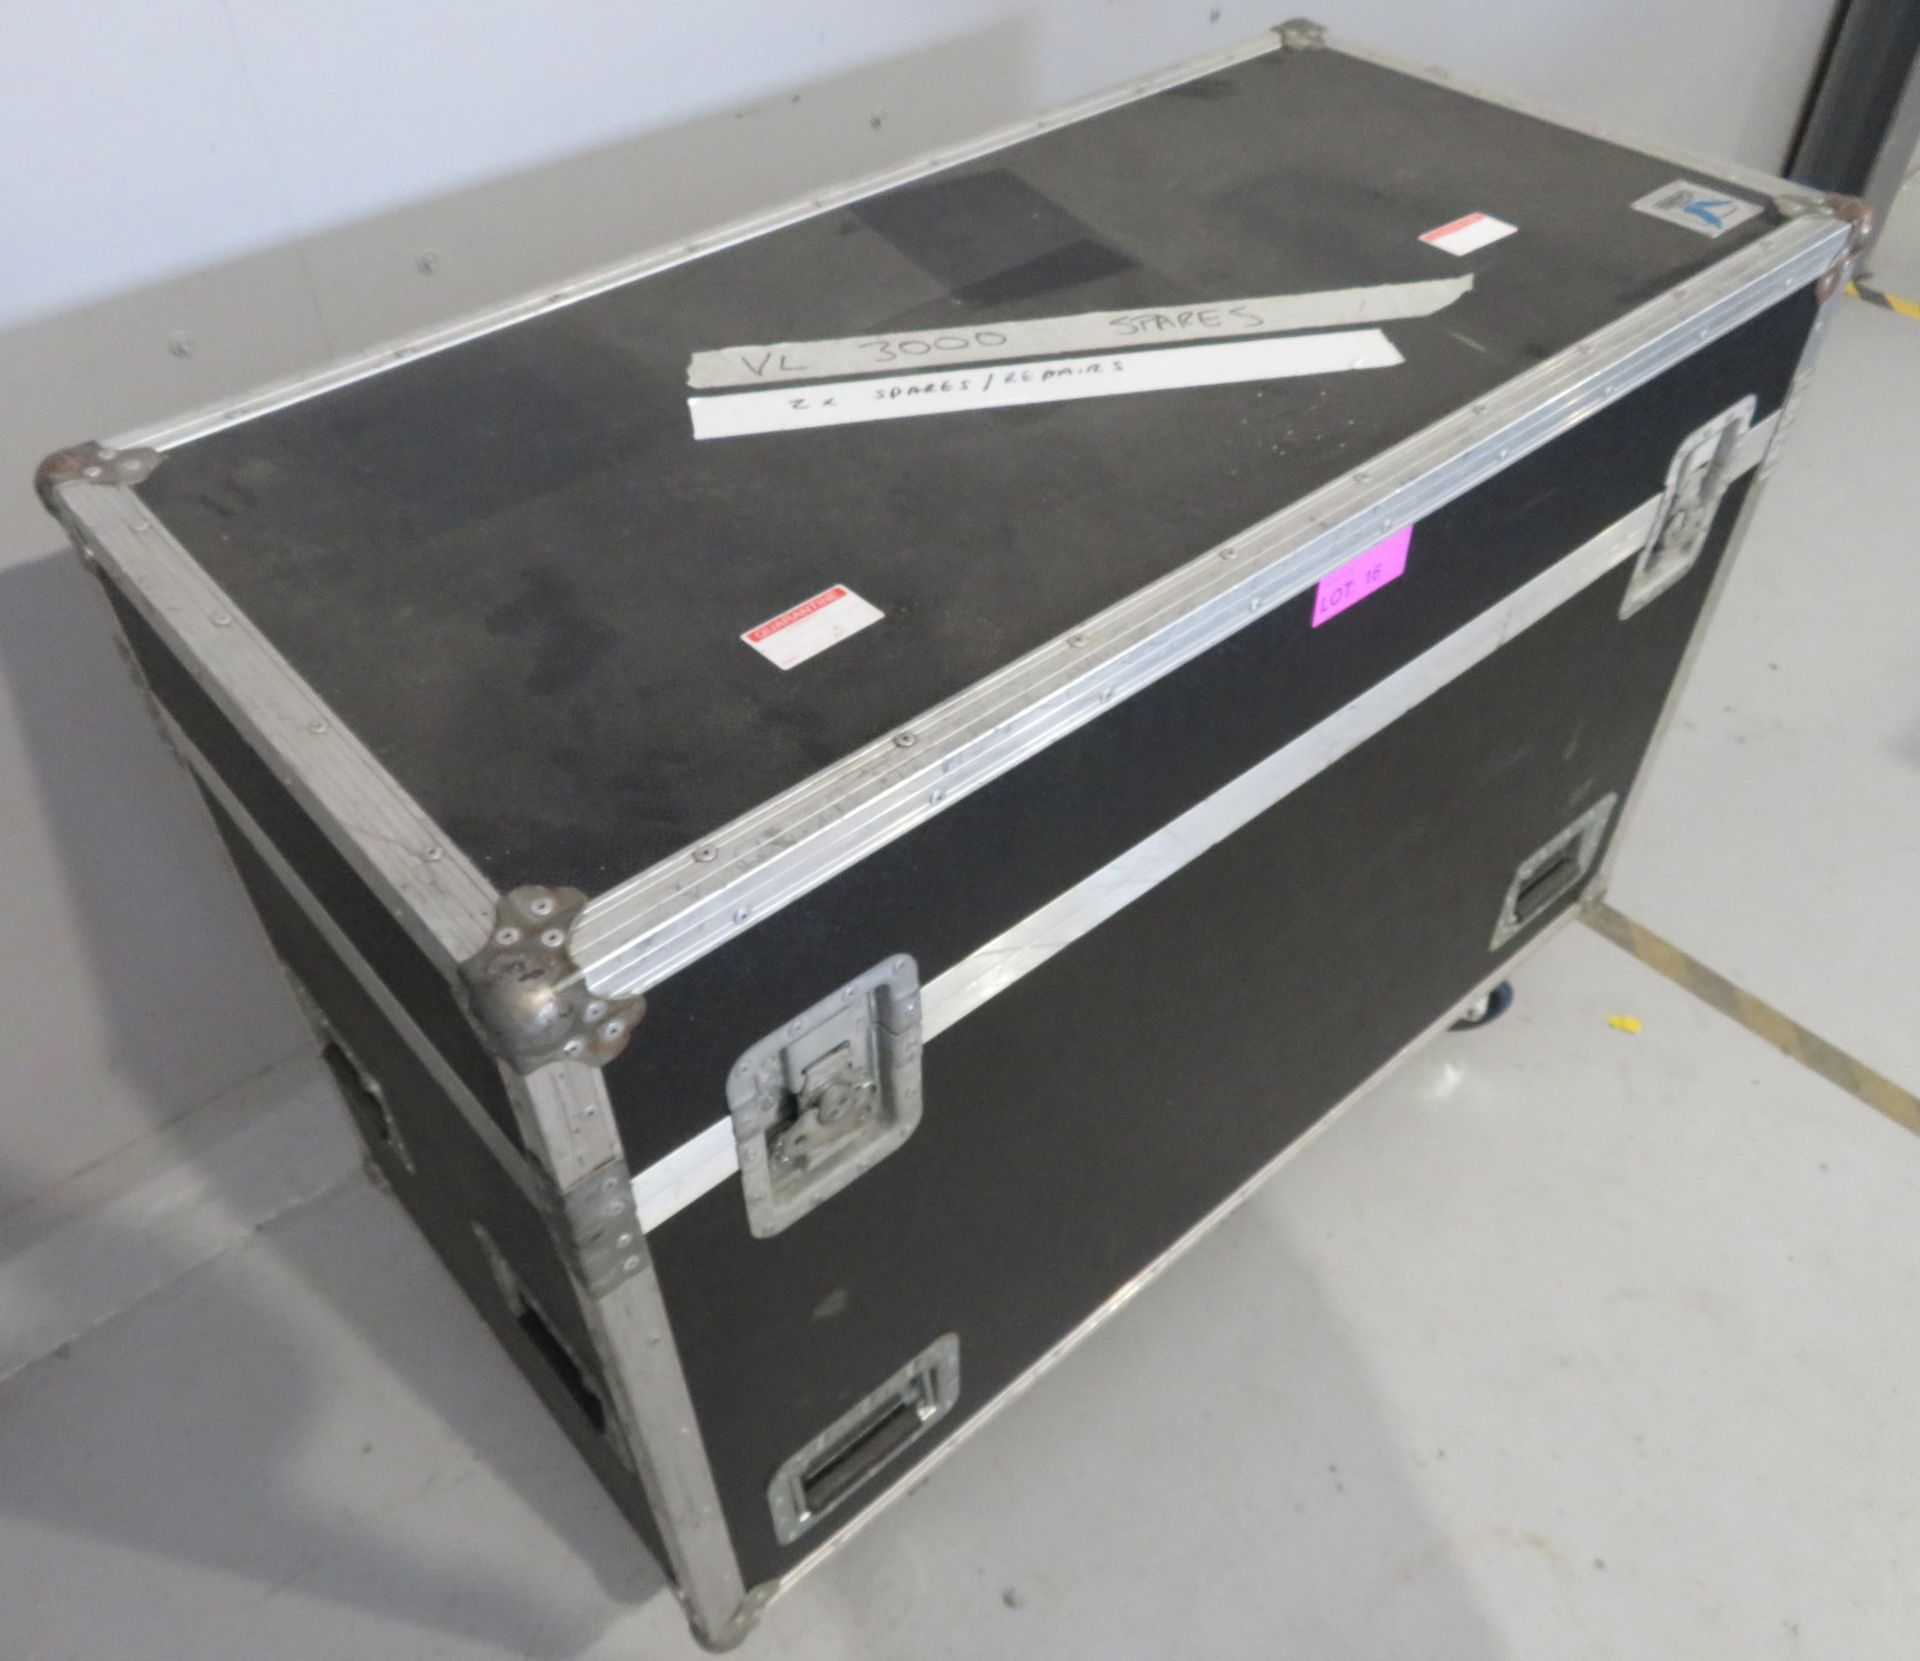 Pair of Varilite VL3000 Wash in flightcase. Includes hanging clamps and safety bonds. As s - Image 10 of 10